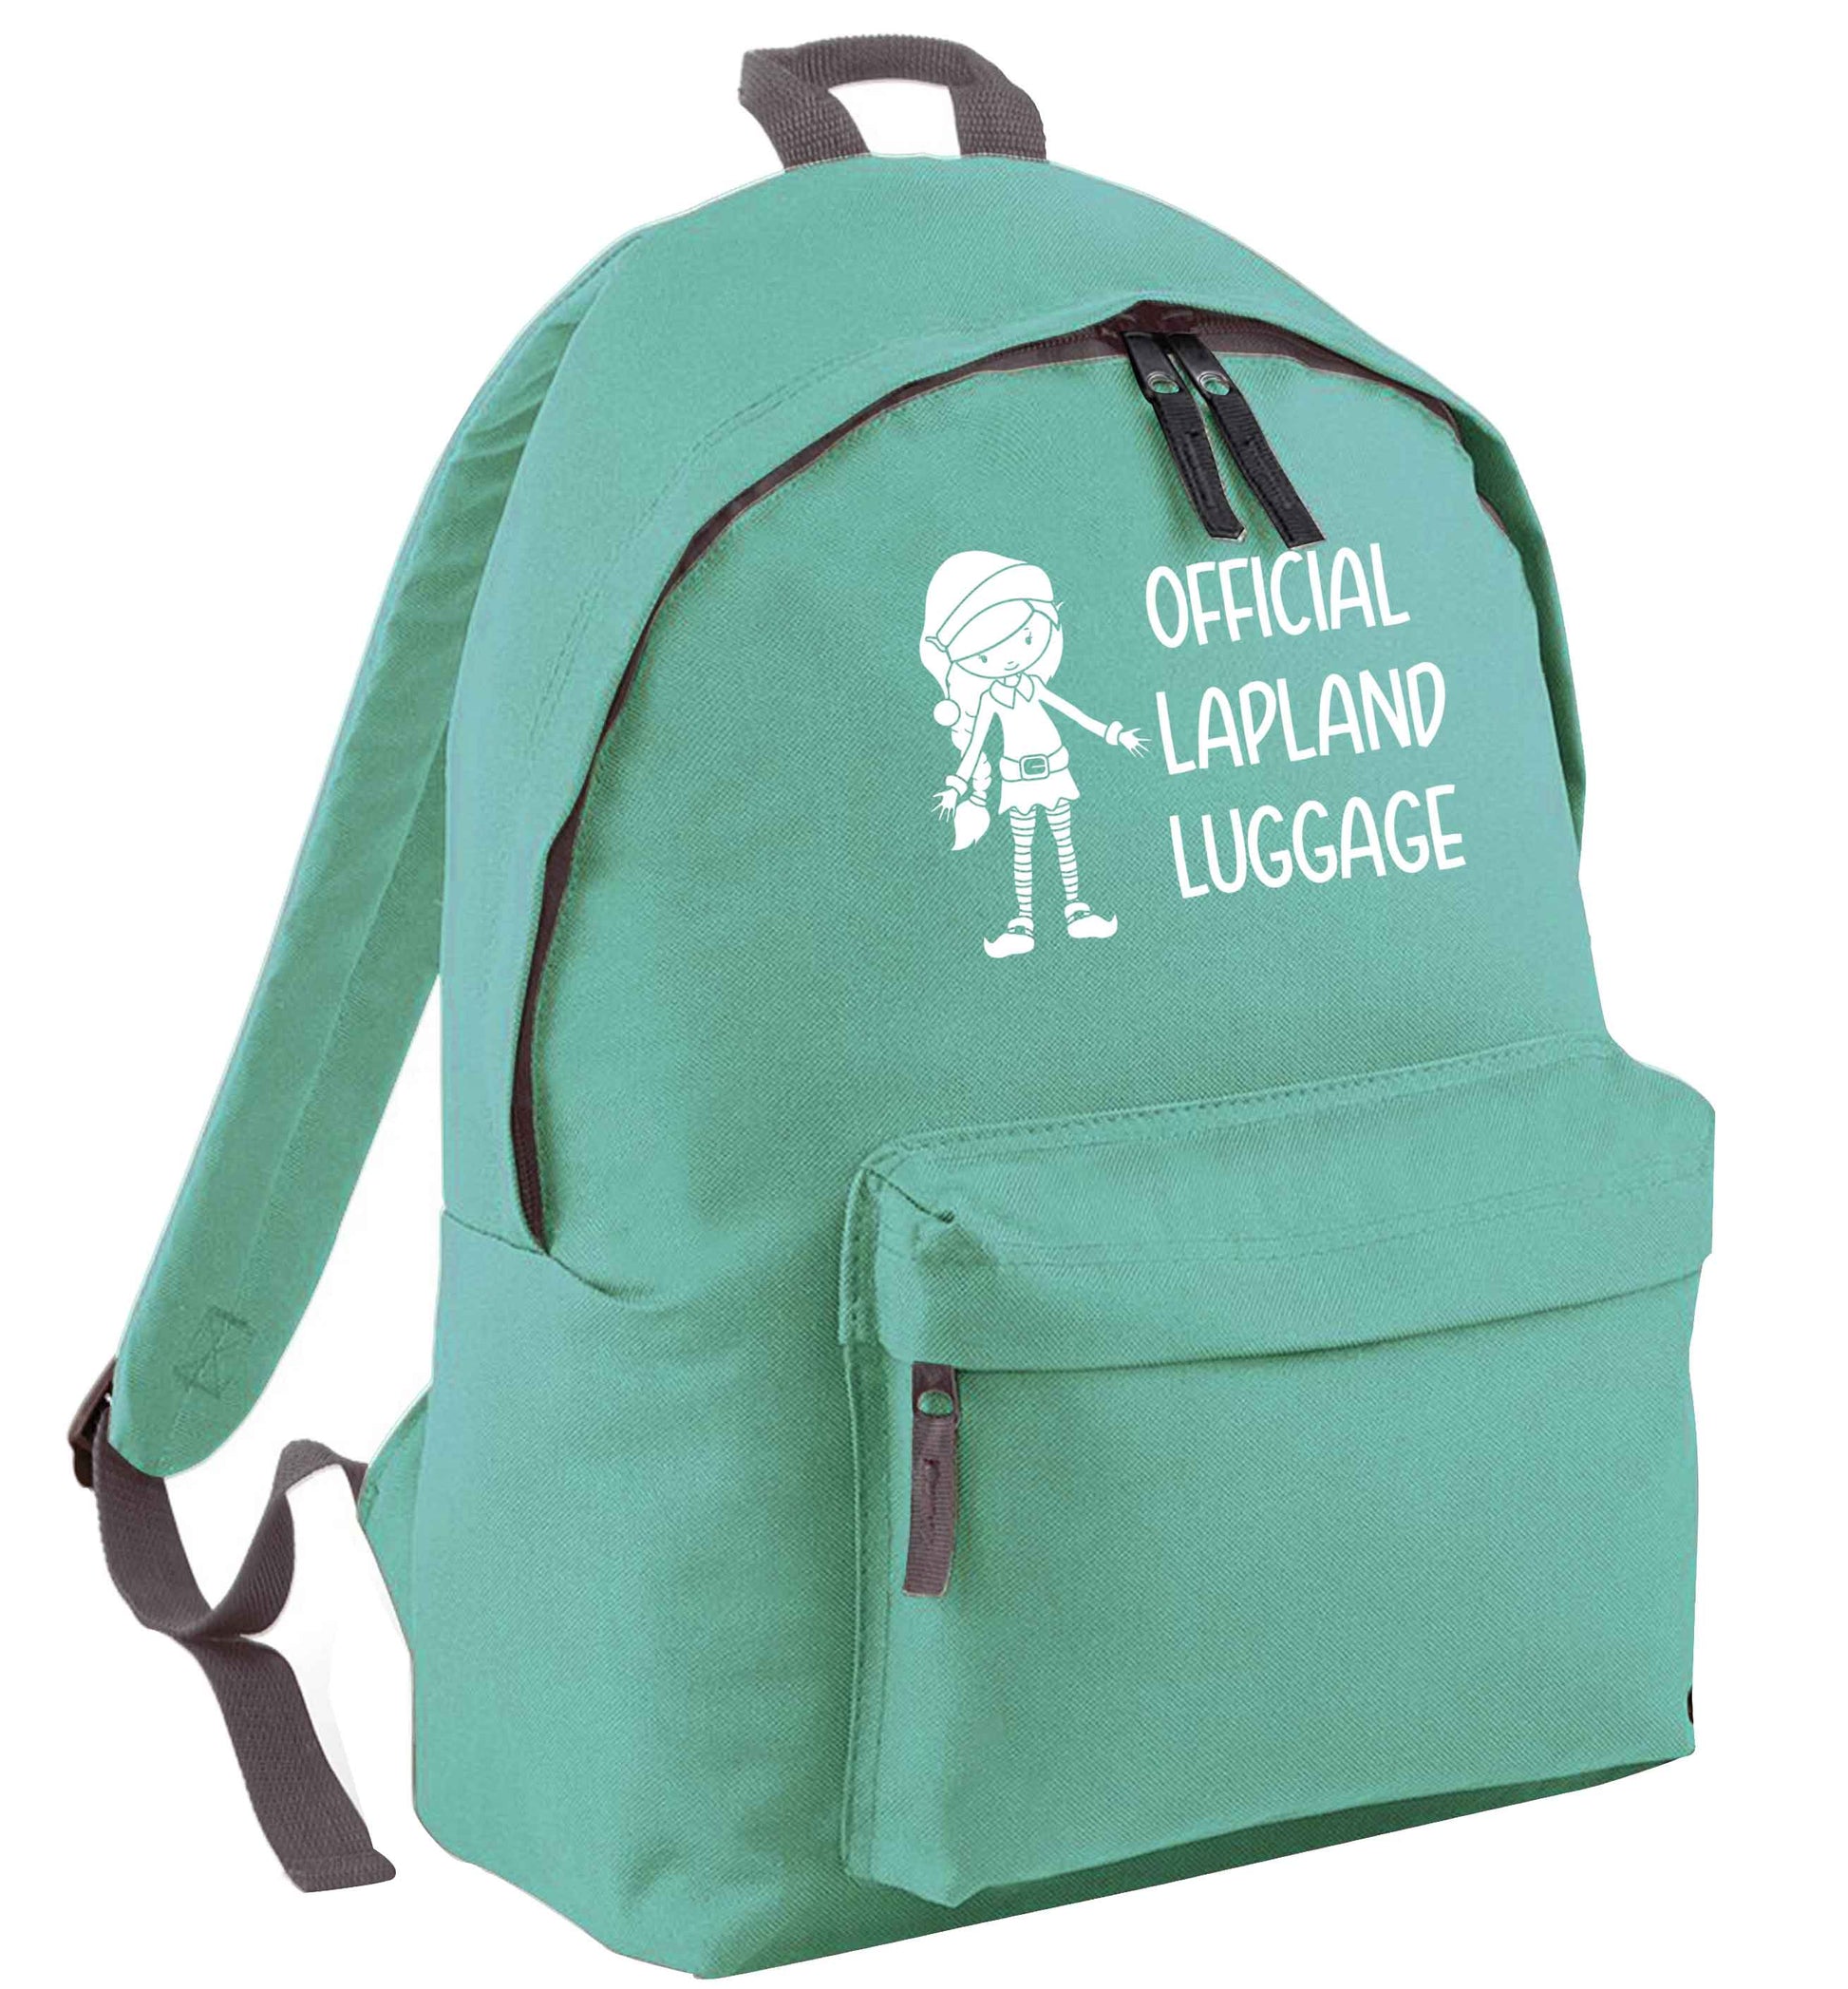 Official lapland luggage - Elf snowflake mint adults backpack